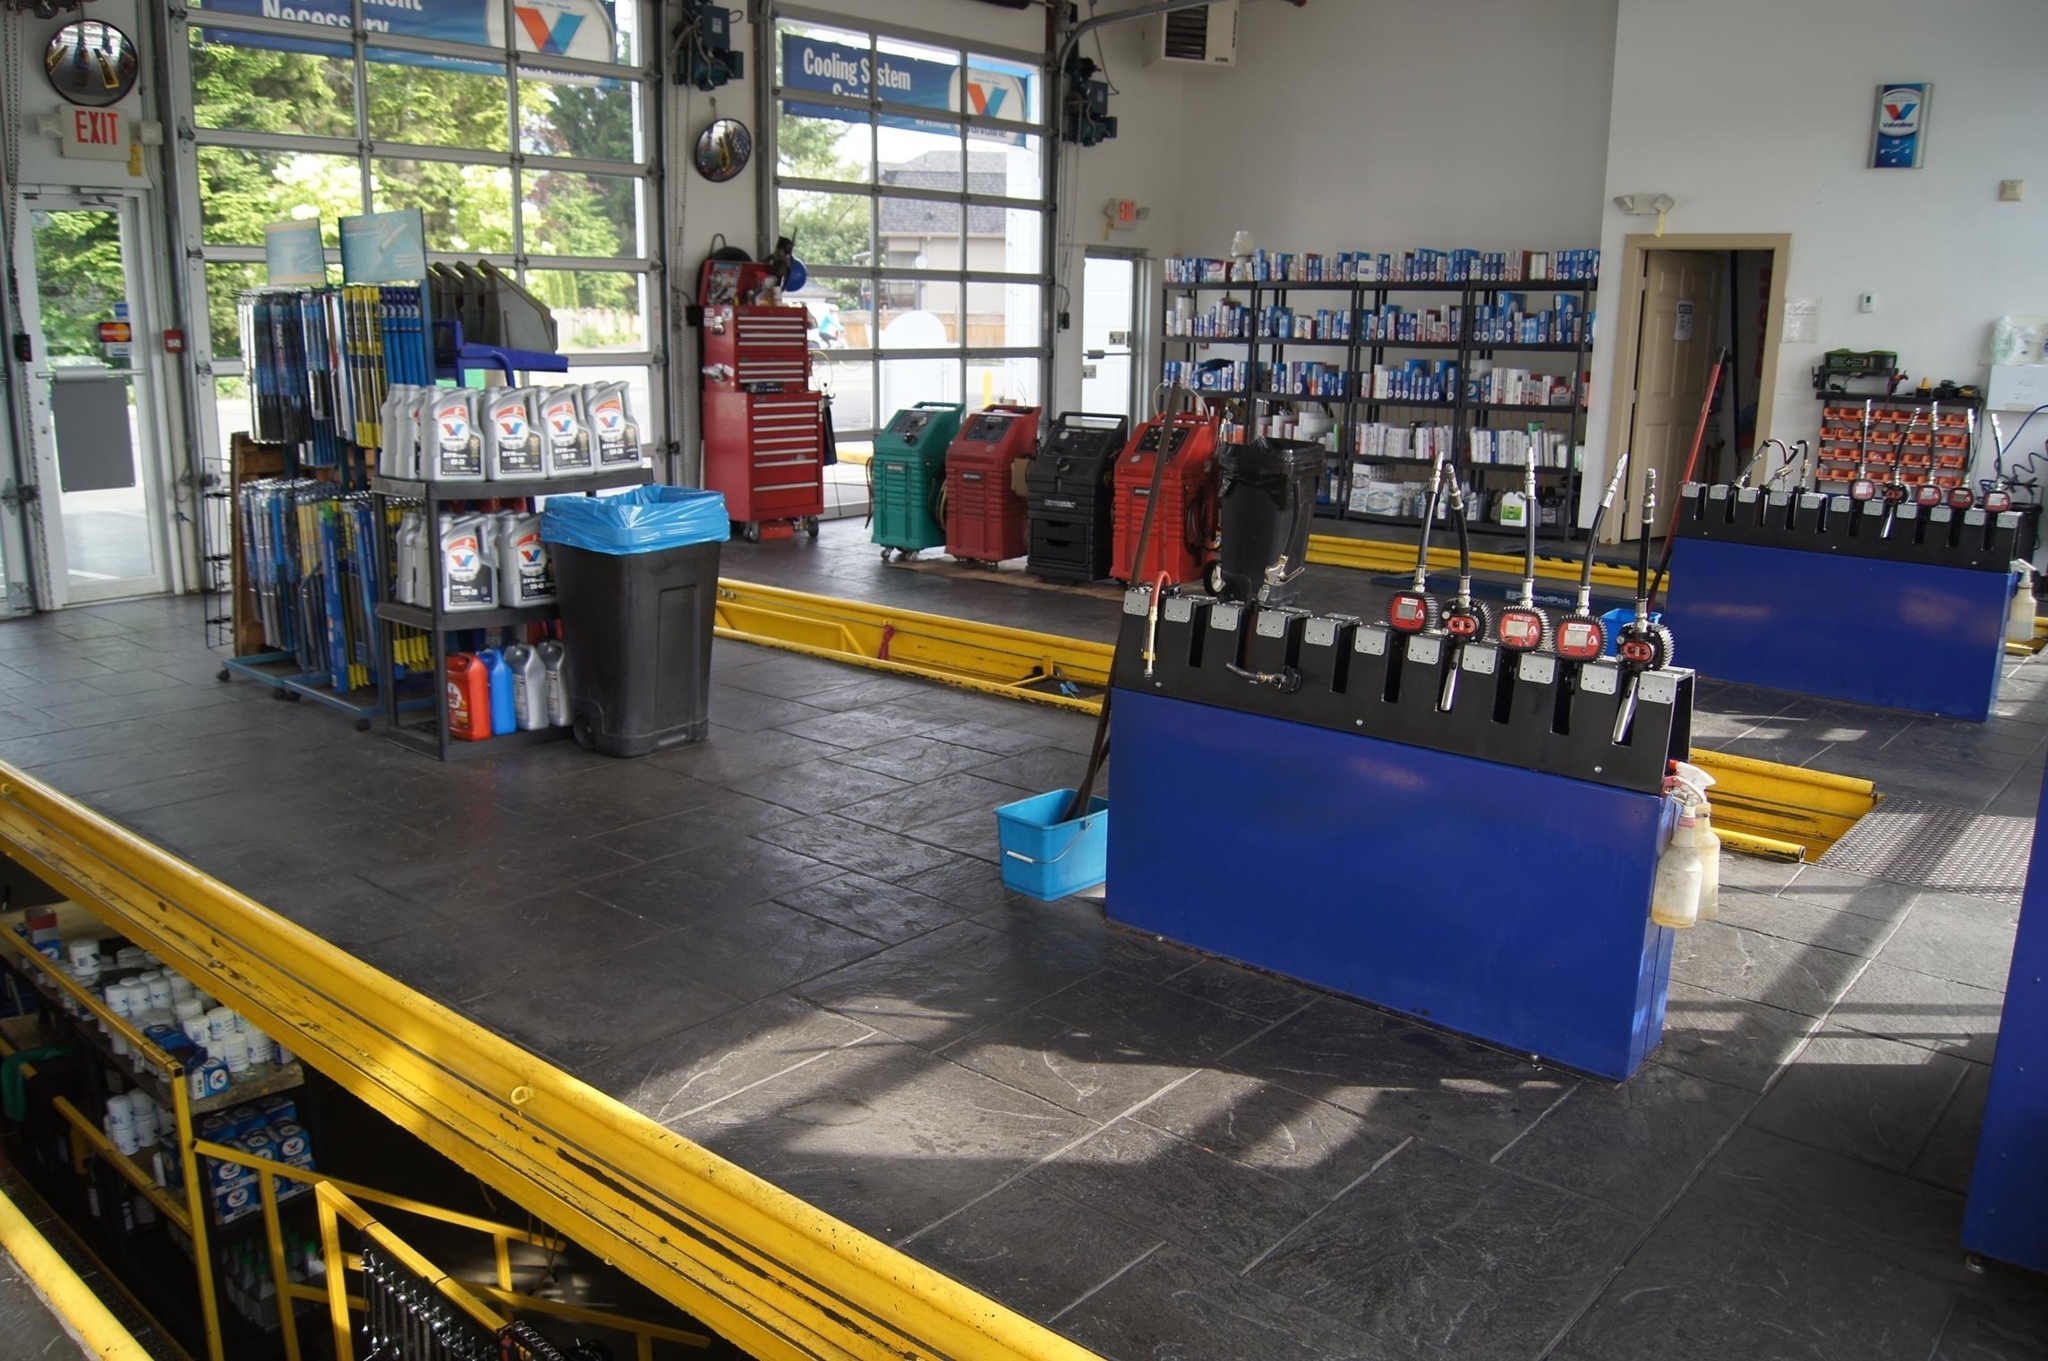 Take 5 Oil Change - Oil Changes & Lubrication Service